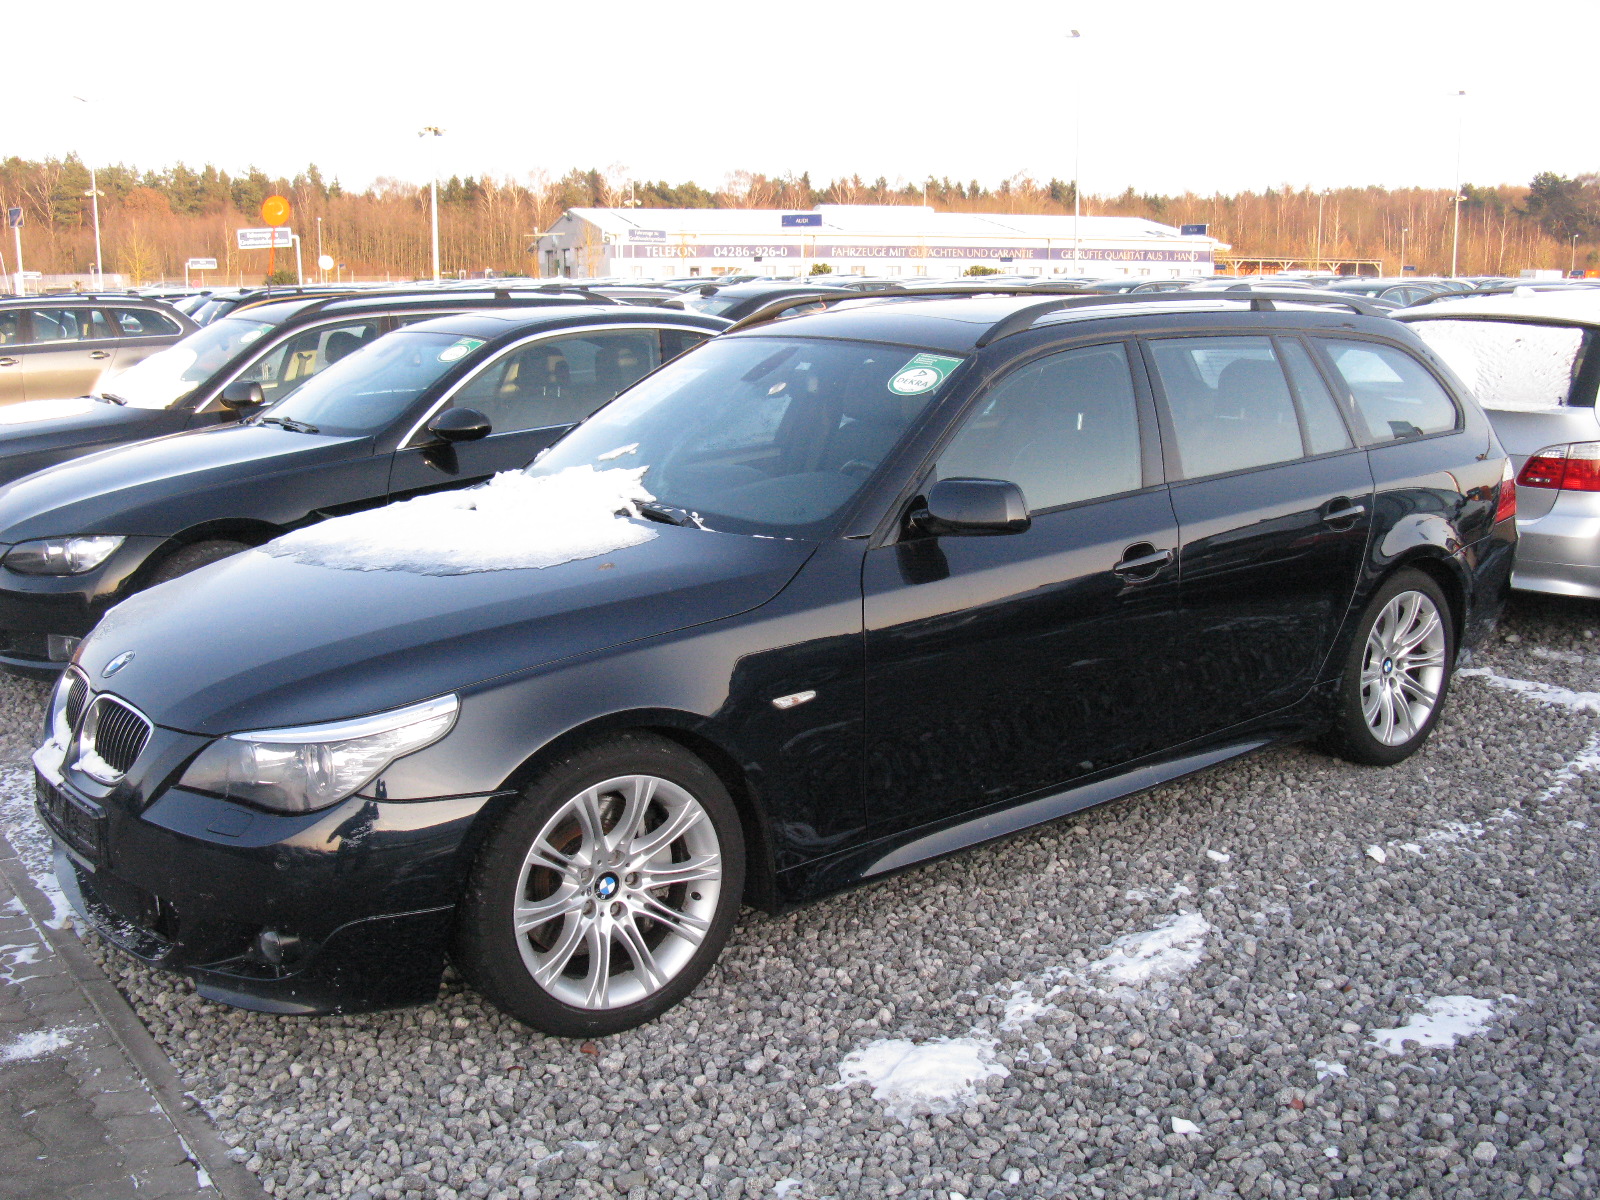 BMW 535d Touring M Sport E61 | Flickr - Photo Sharing!